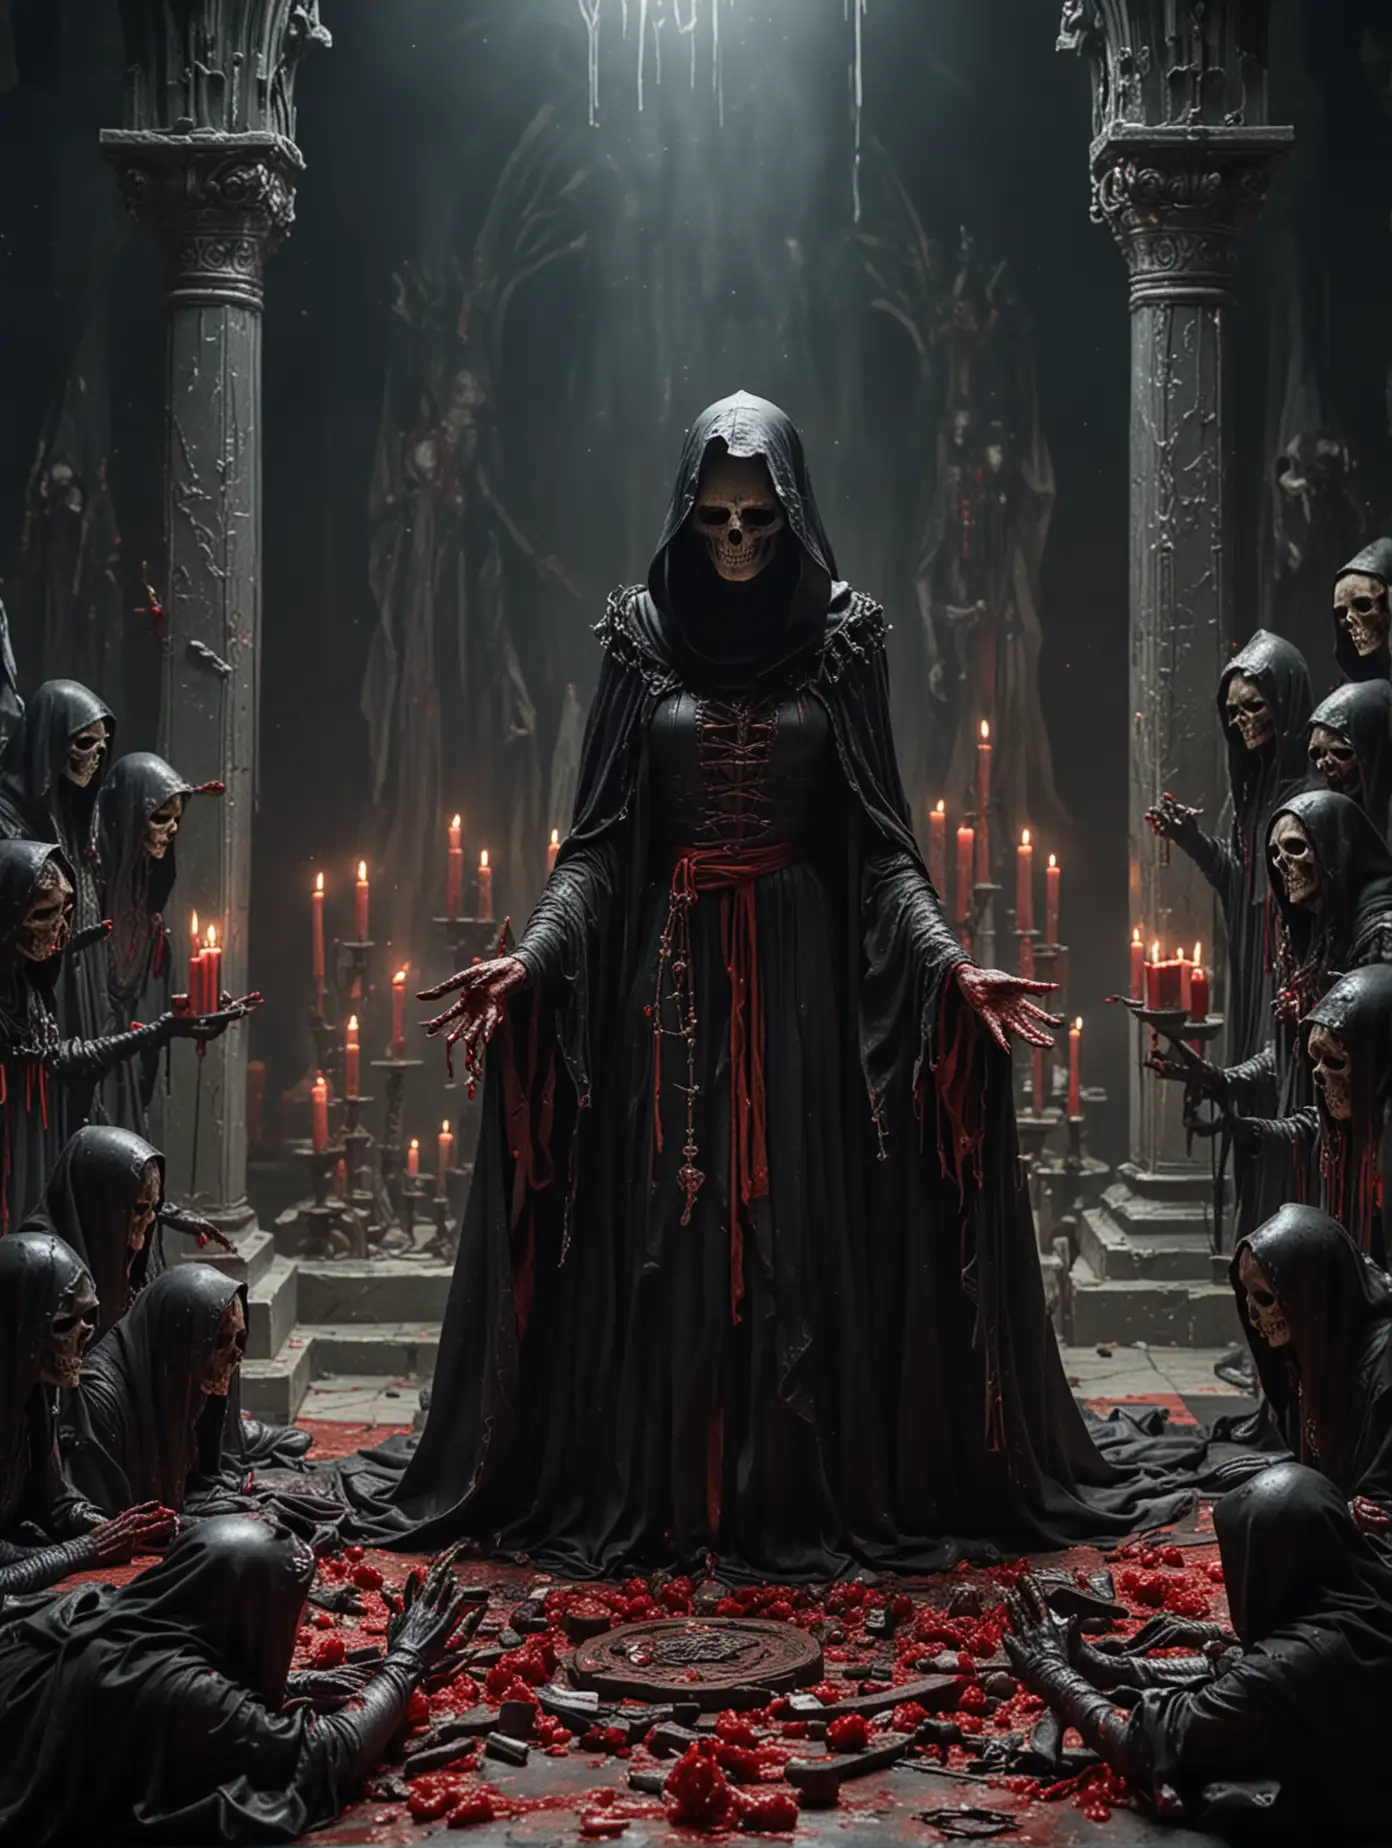 The main character is a queen lich performing a dark ritual on a bloody altar. Around her are hooded acolytes bowing.